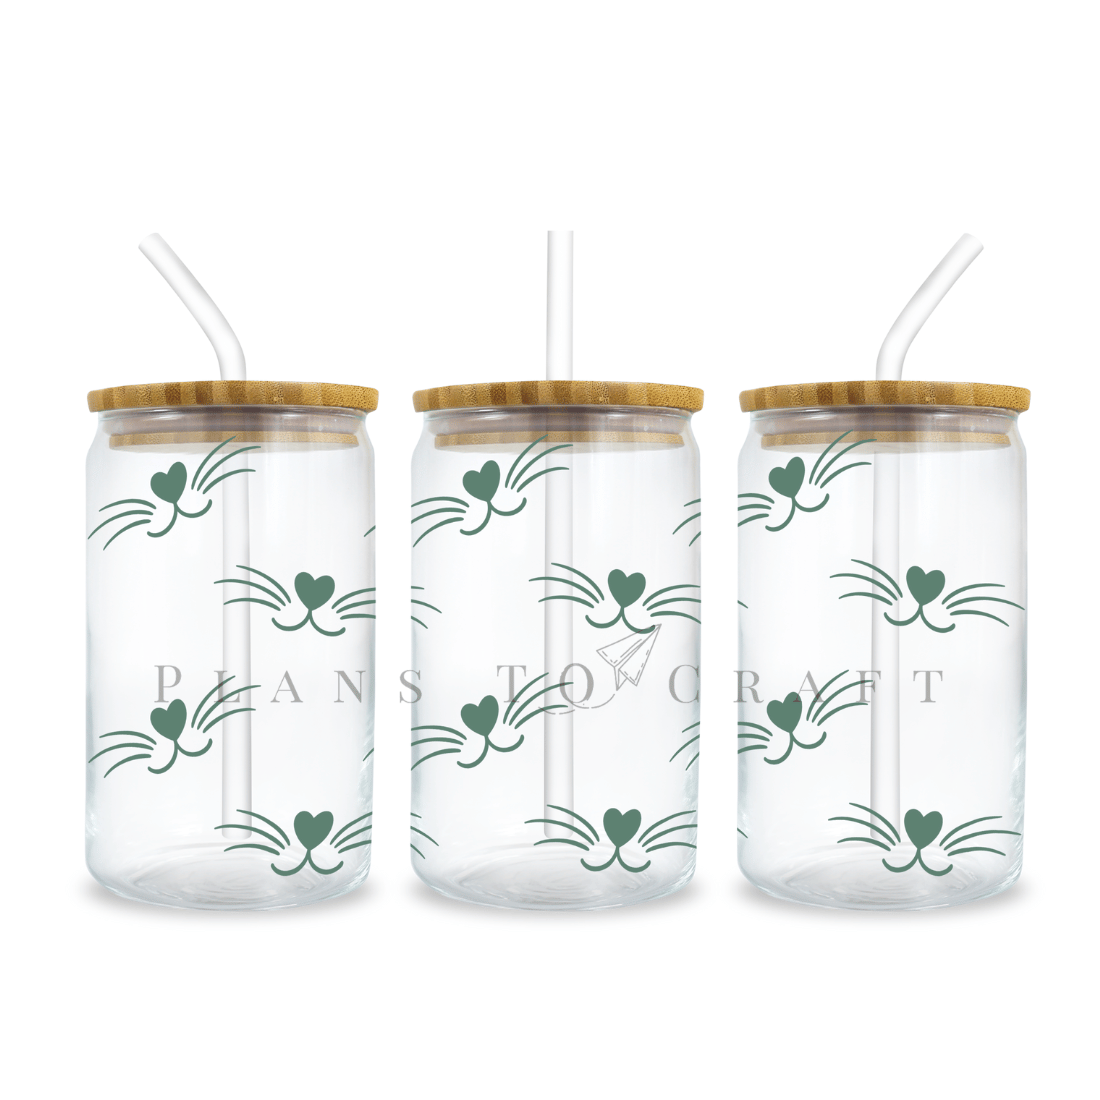 Three glass jars with straws and a wooden lid.